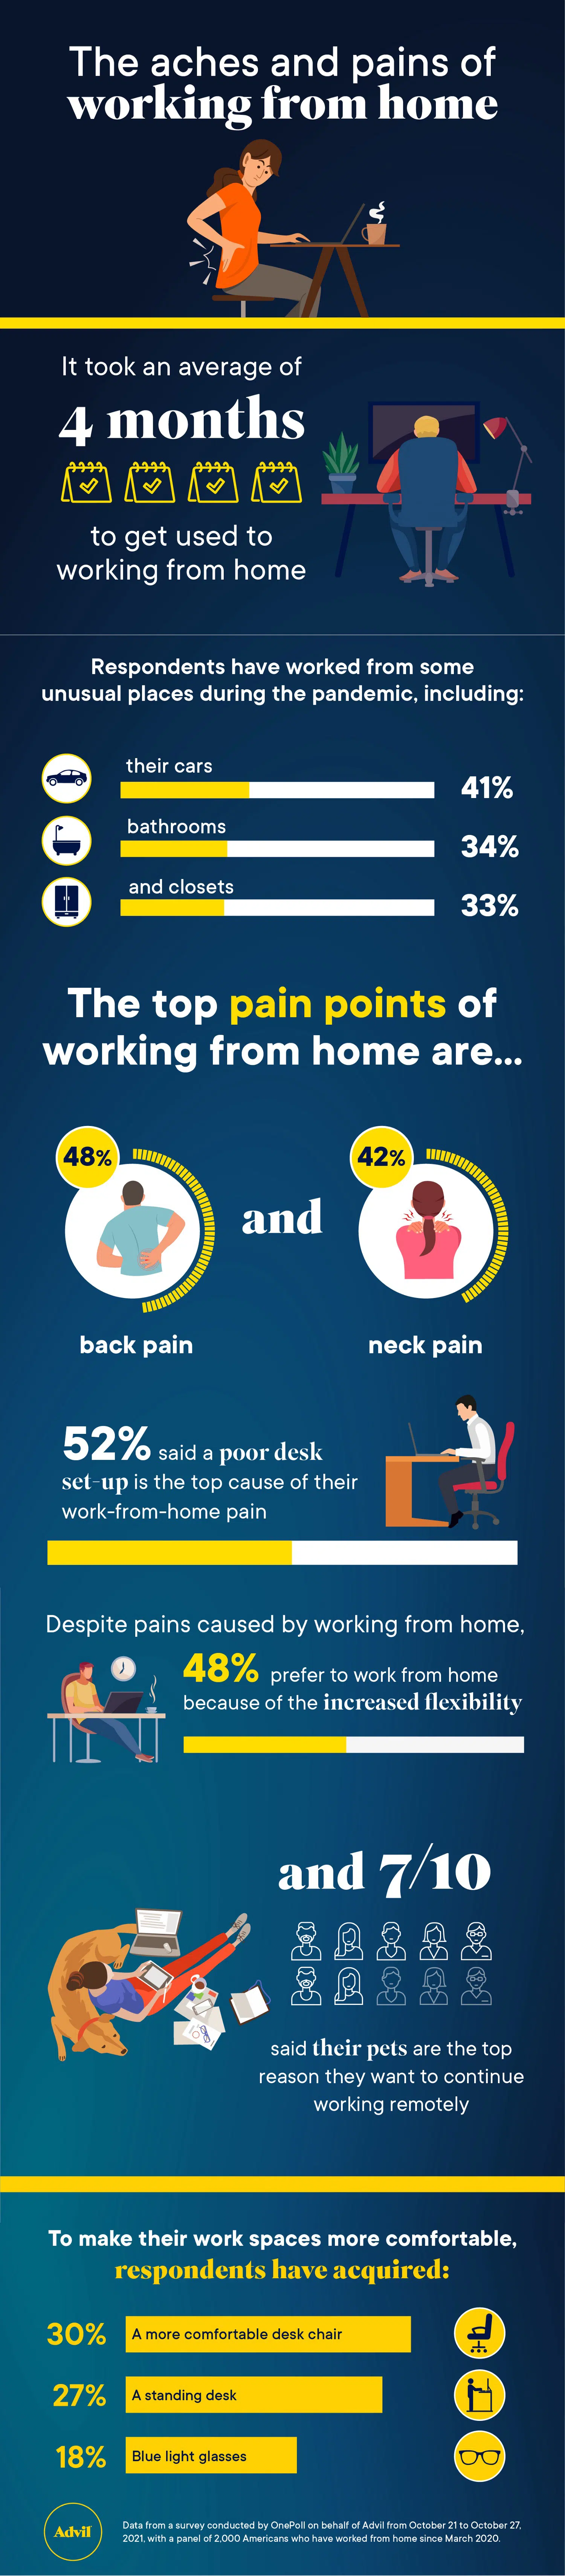 The aches and pains of working from home courtesy of Advil